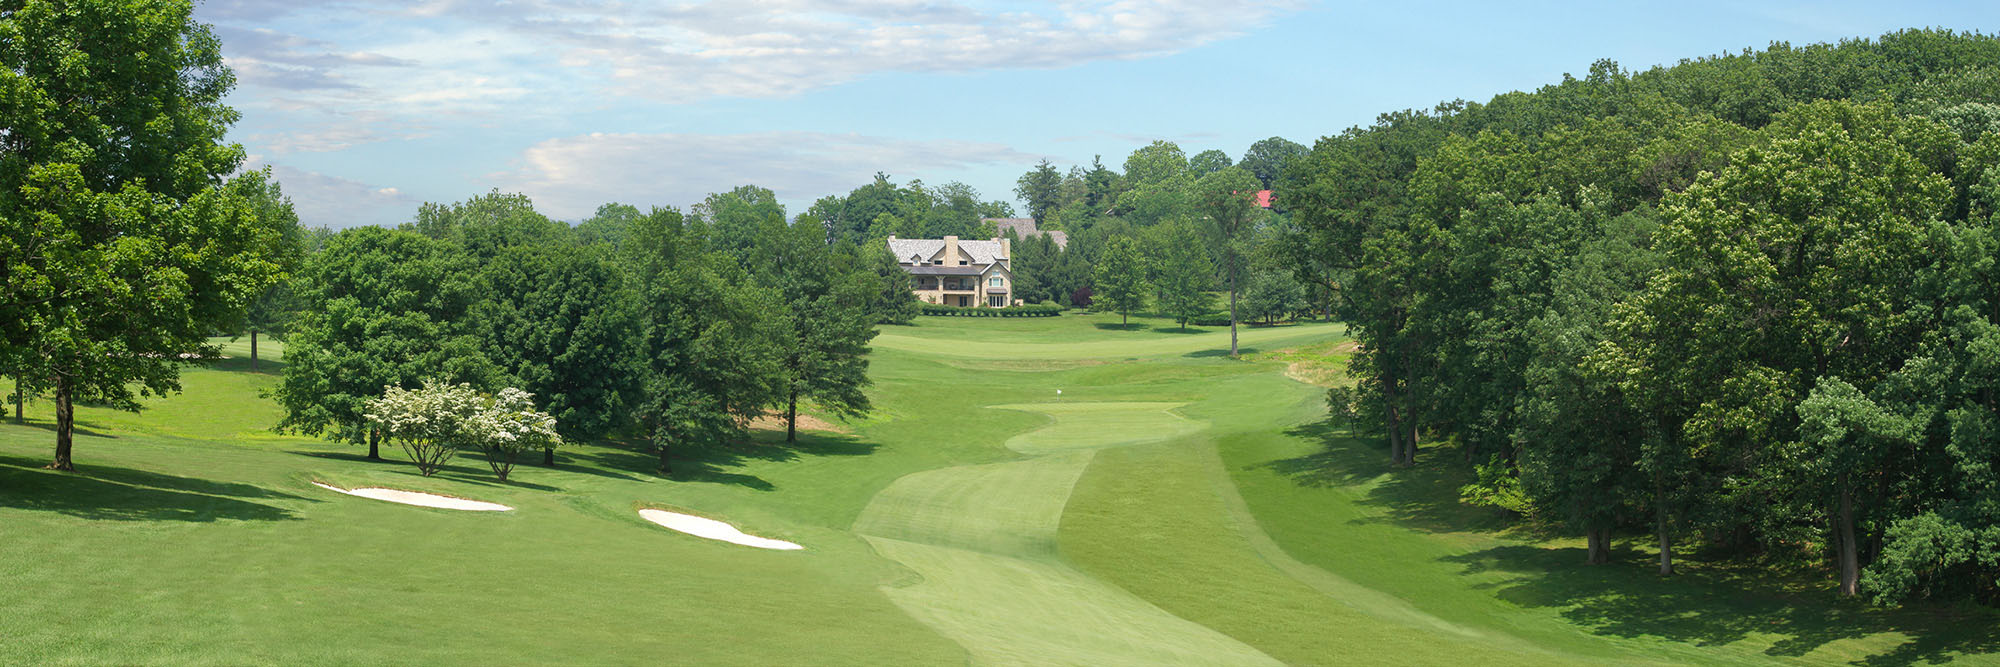 Country Club of York No. 11